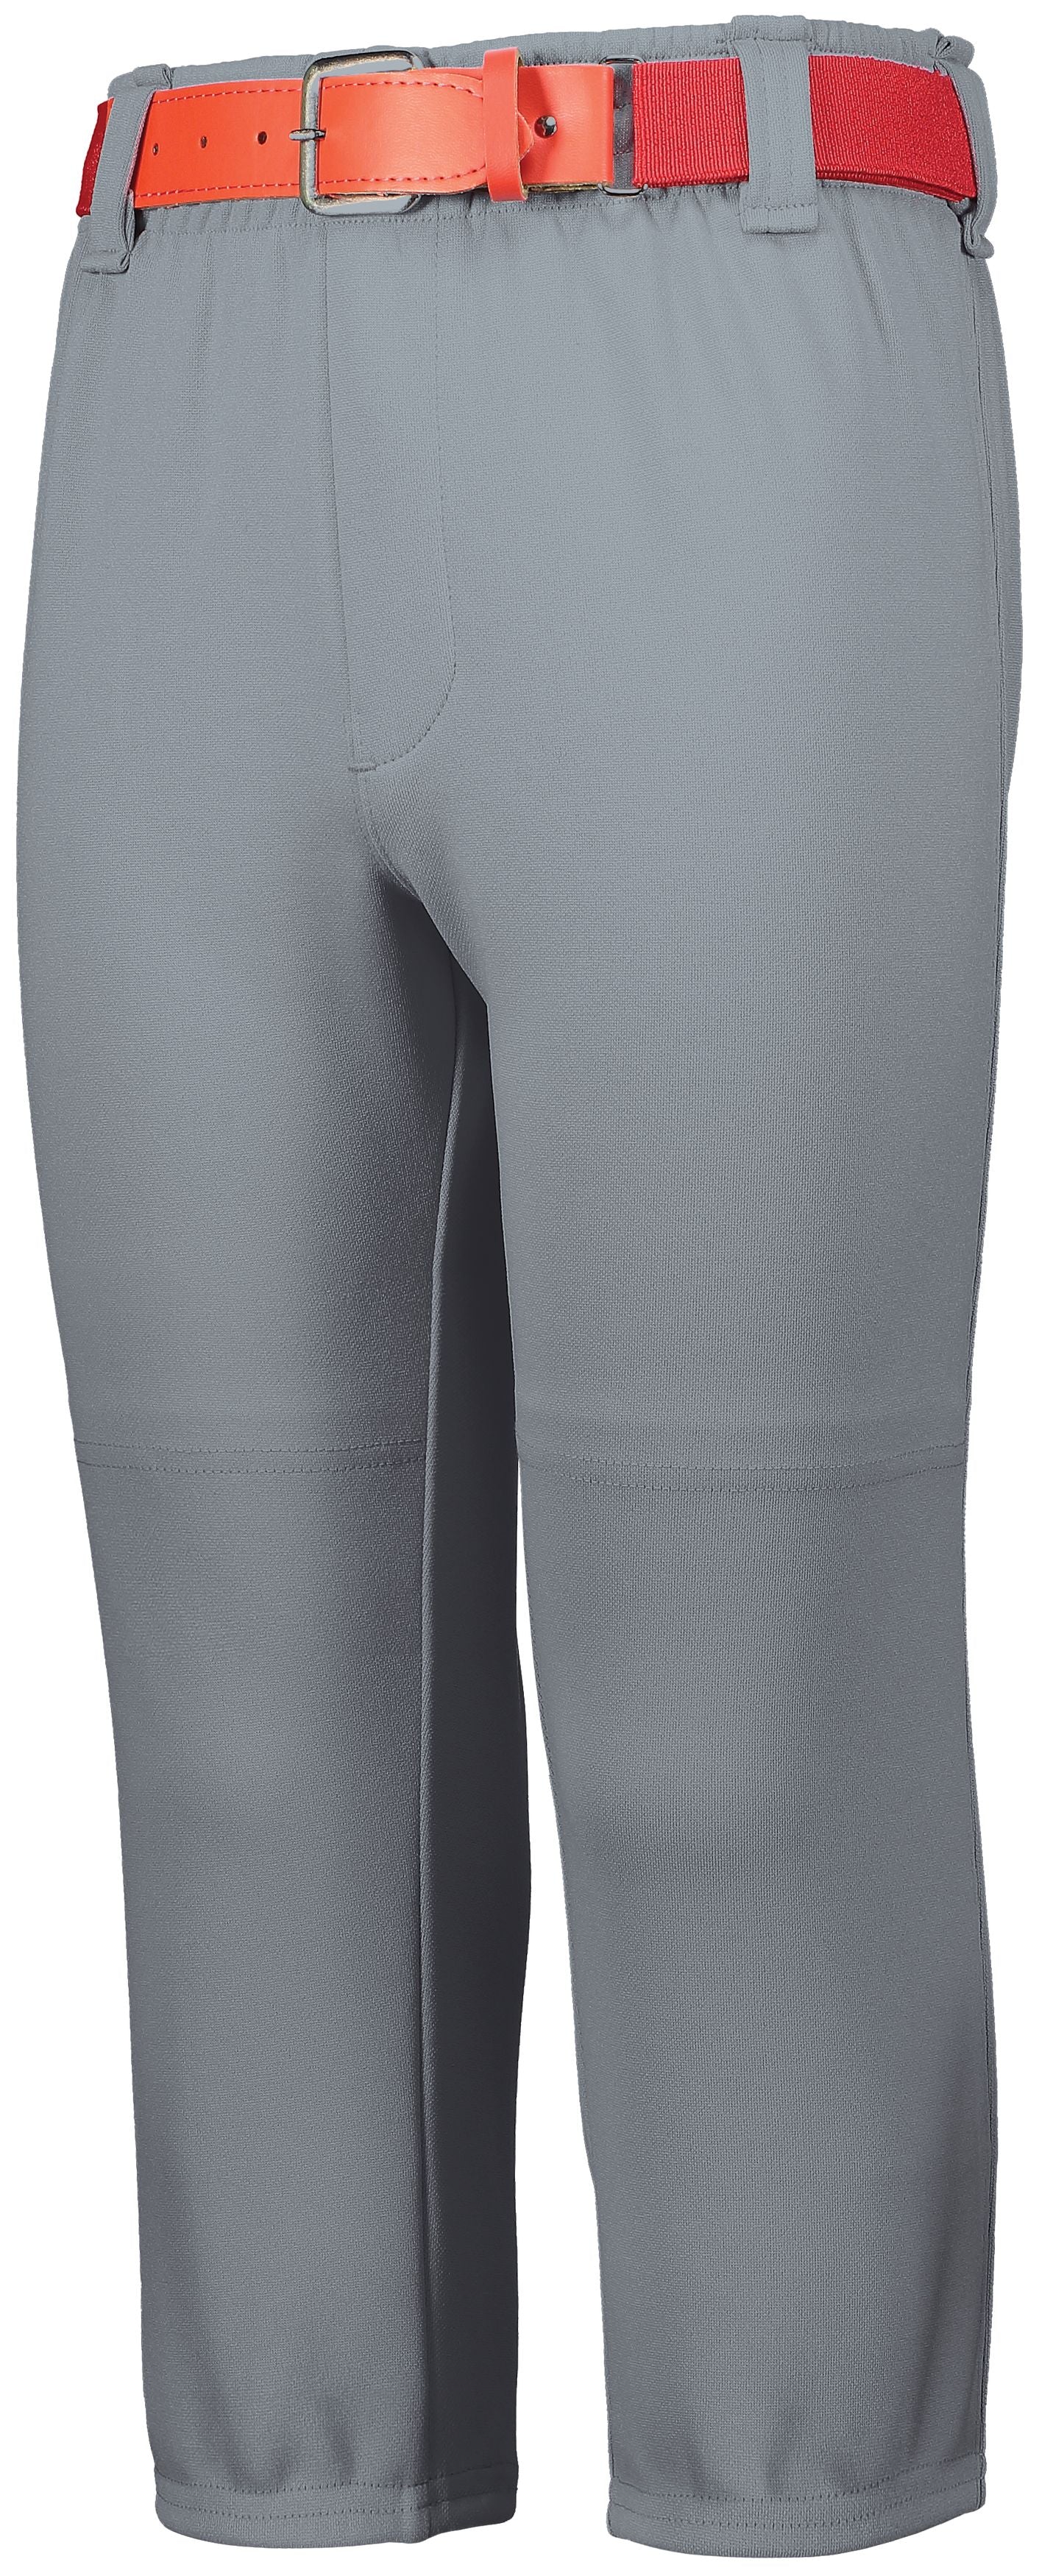 GAMER PULL-UP BASEBALL PANT WITH LOOPS Augusta 6850